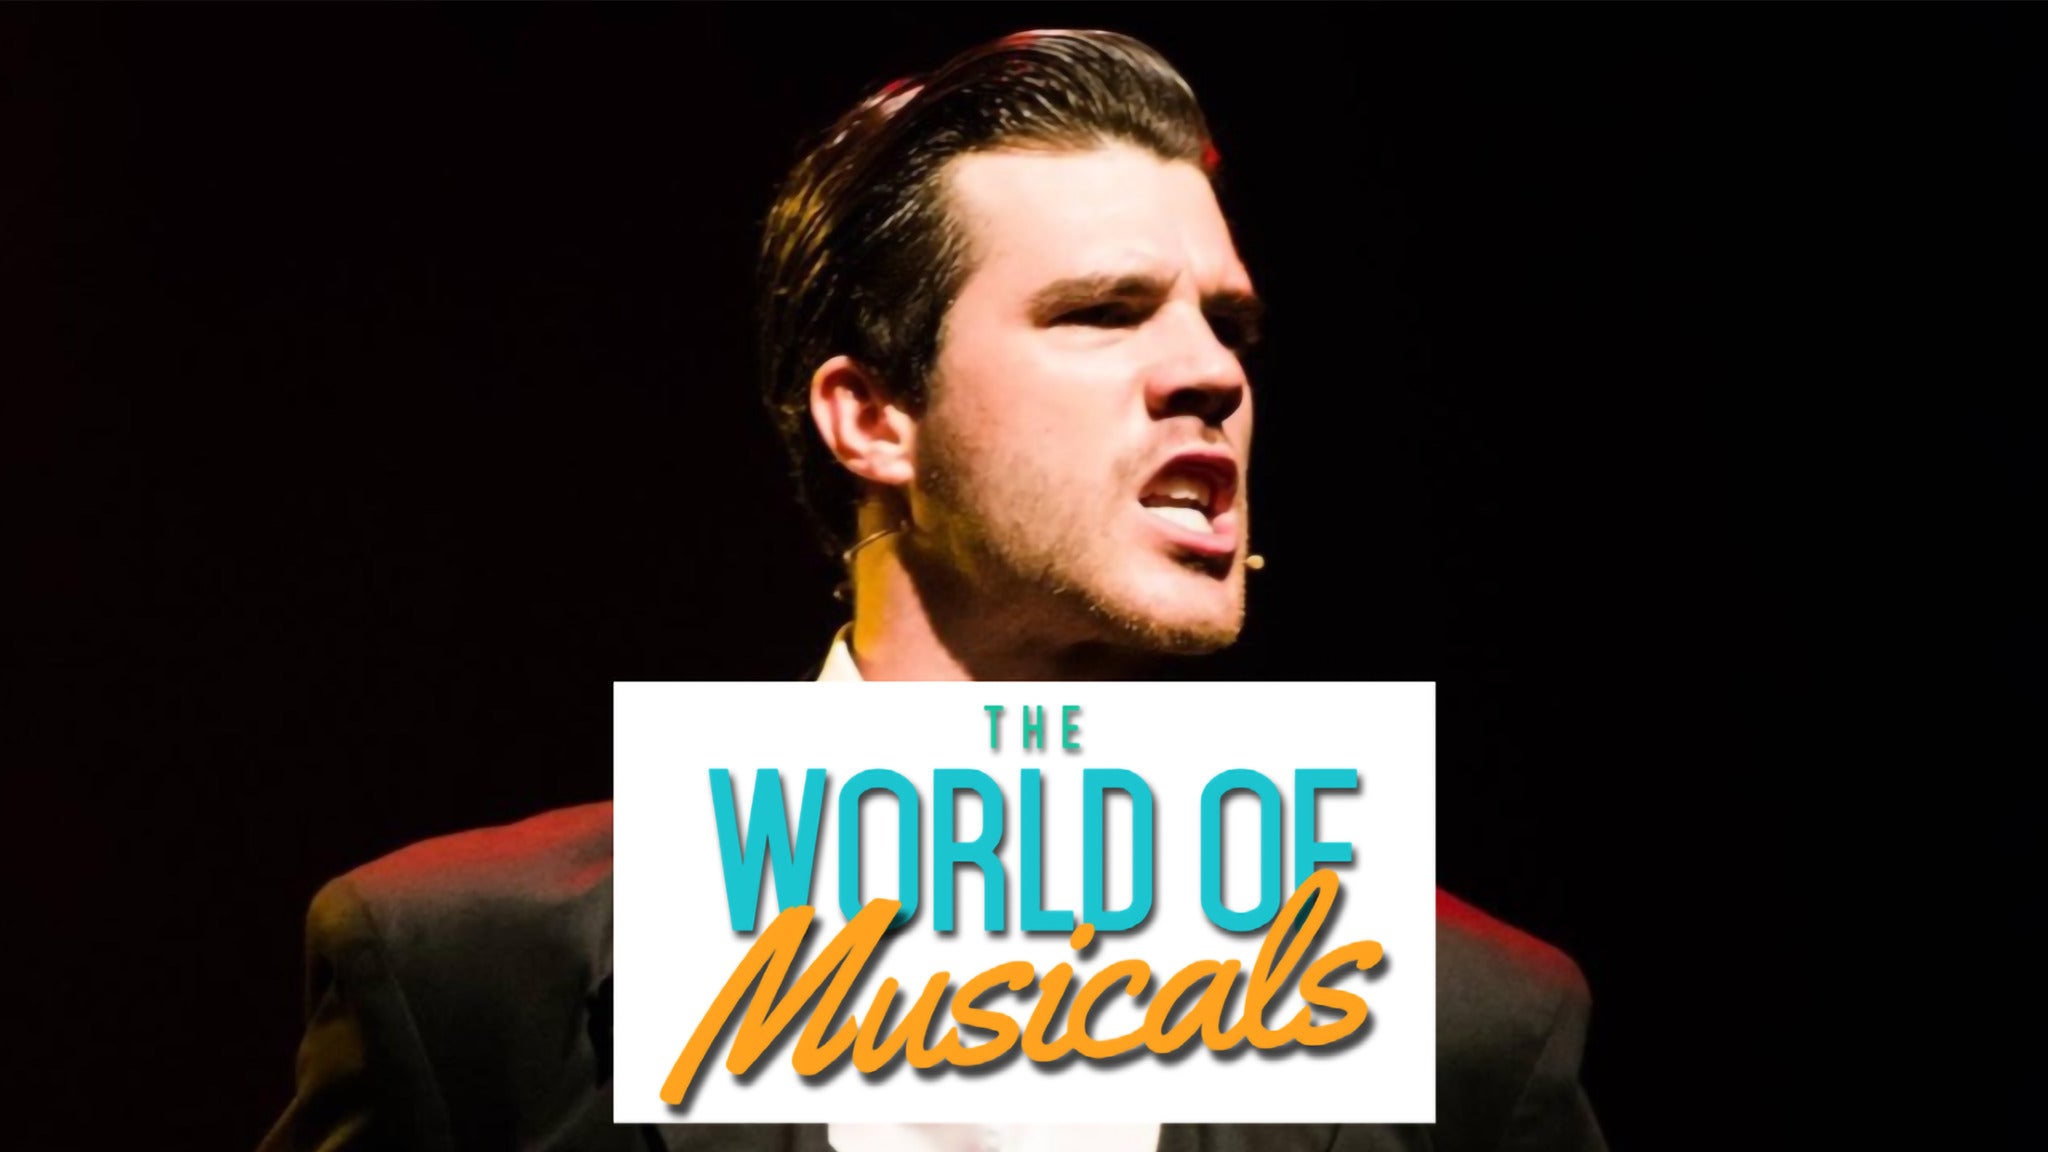 Image used with permission from Ticketmaster | The World of Musicals in Concert tickets